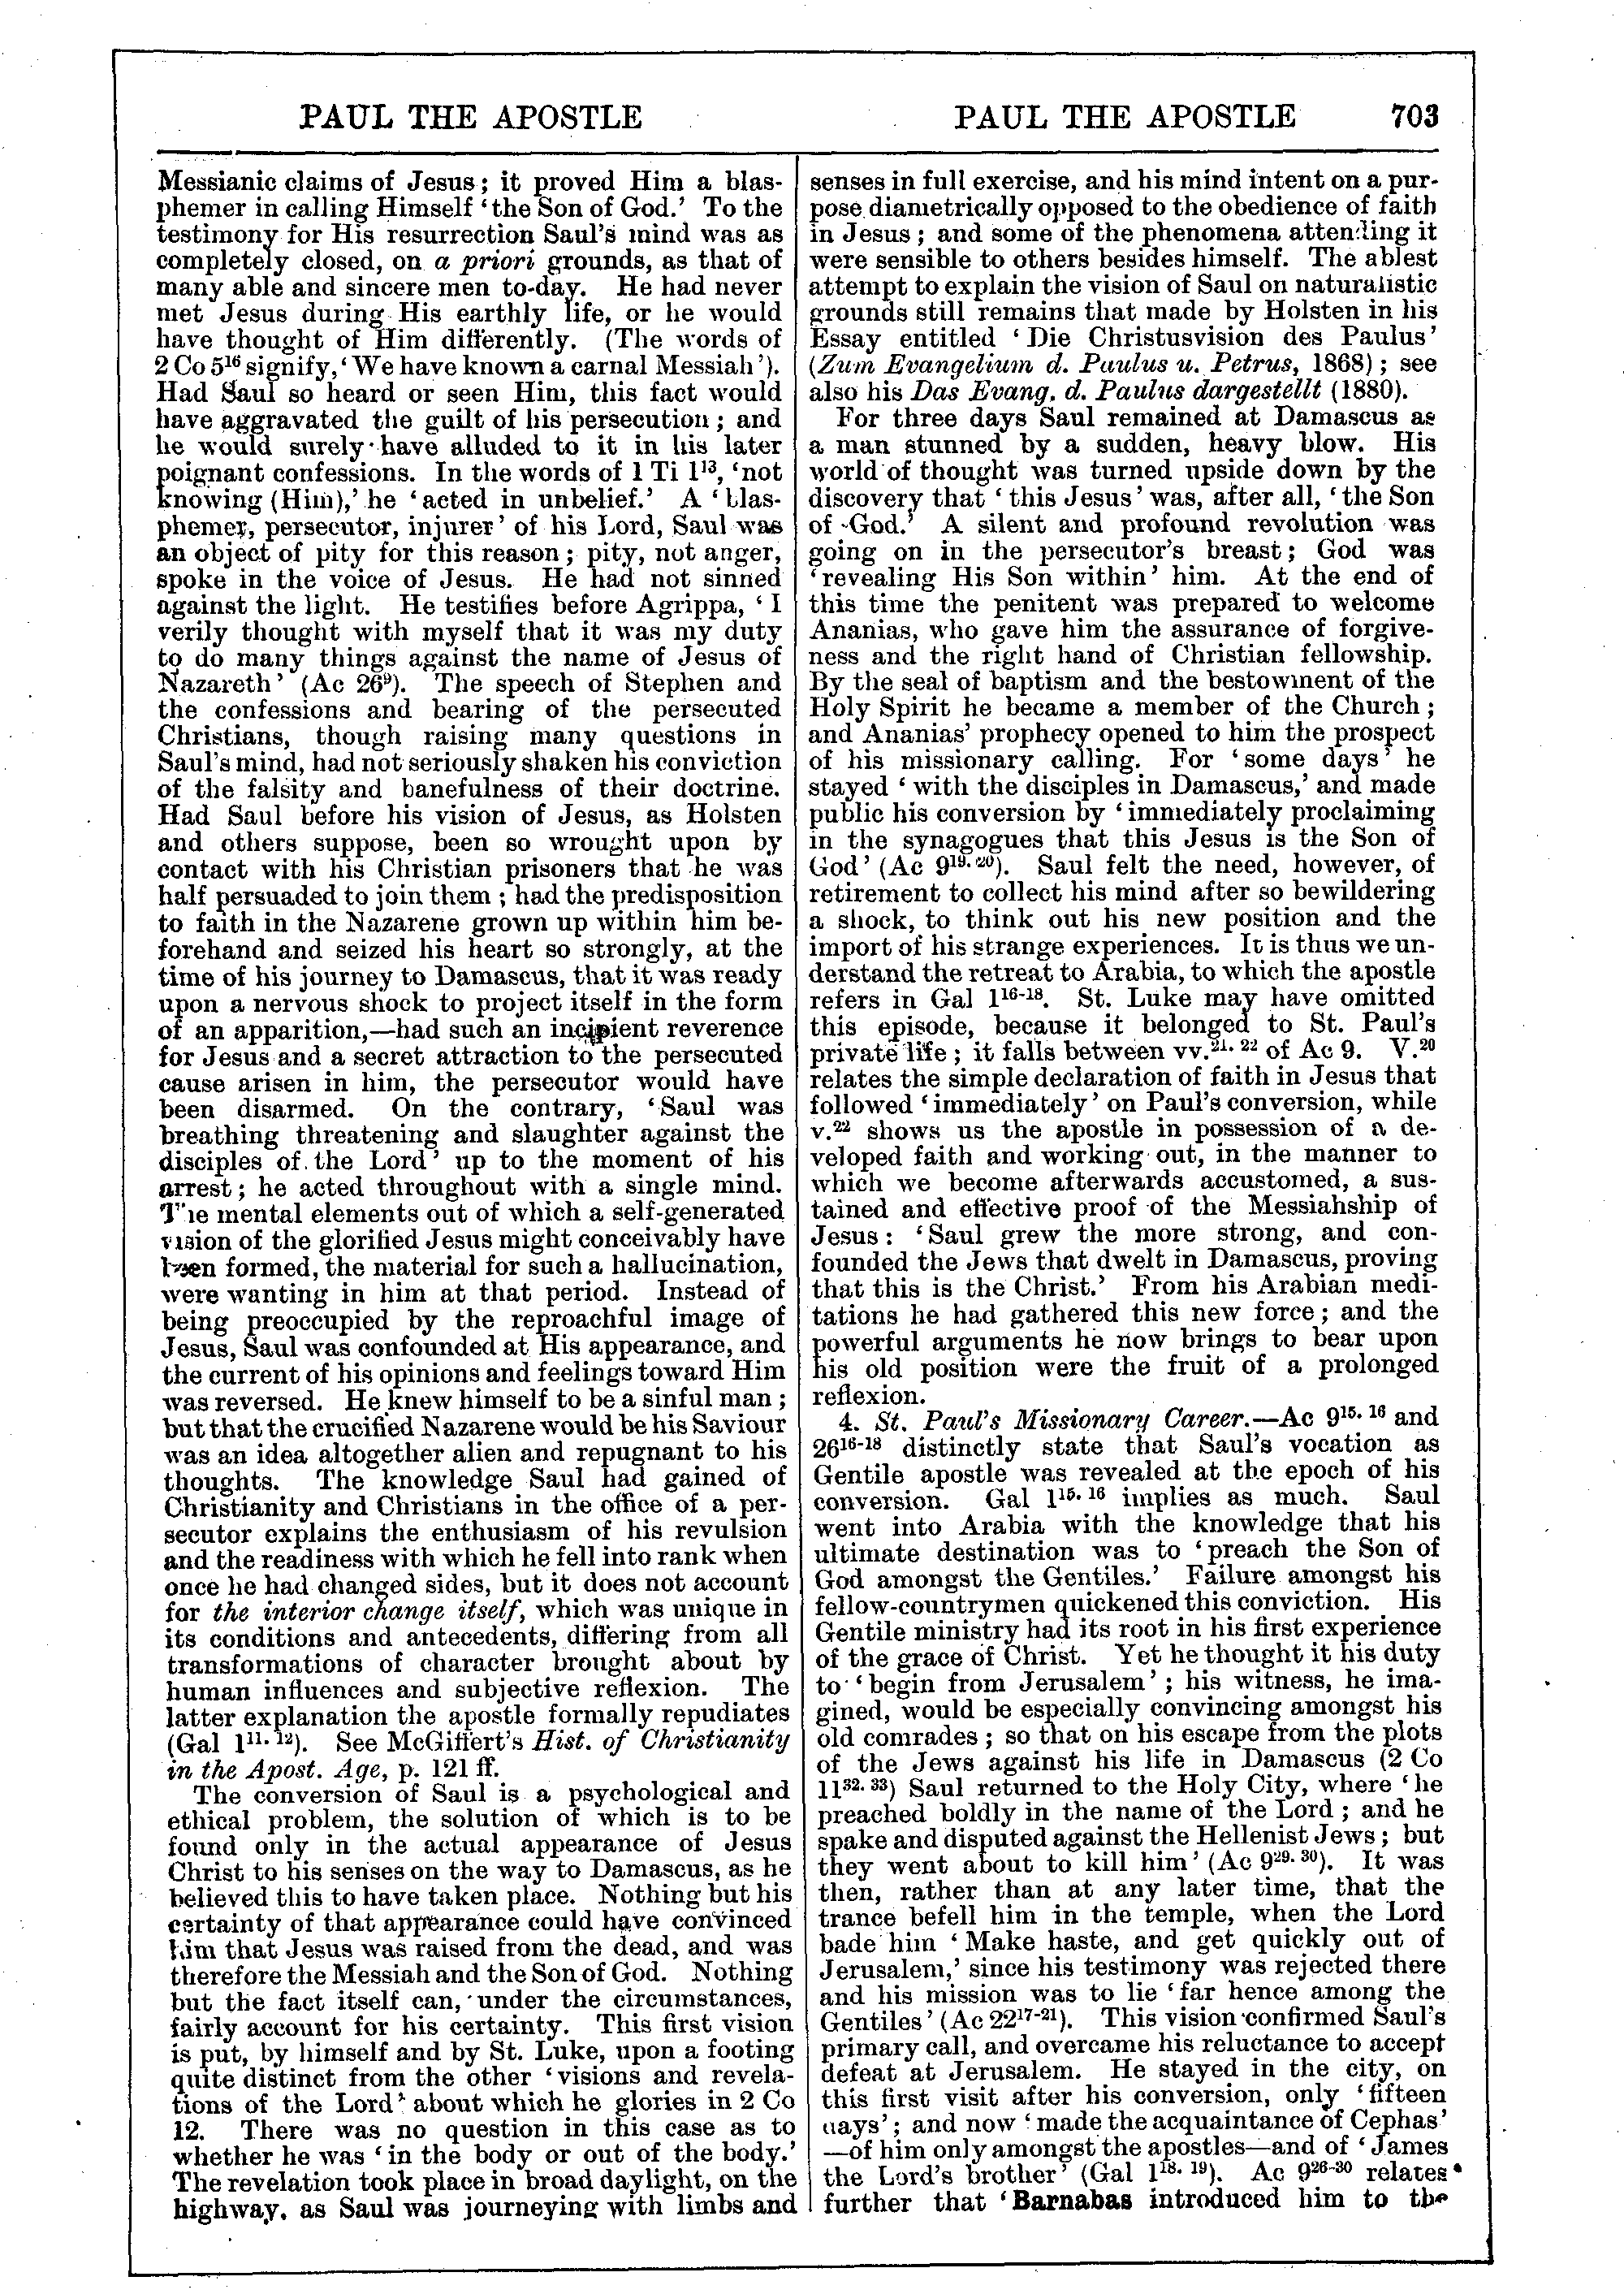 Image of page 703